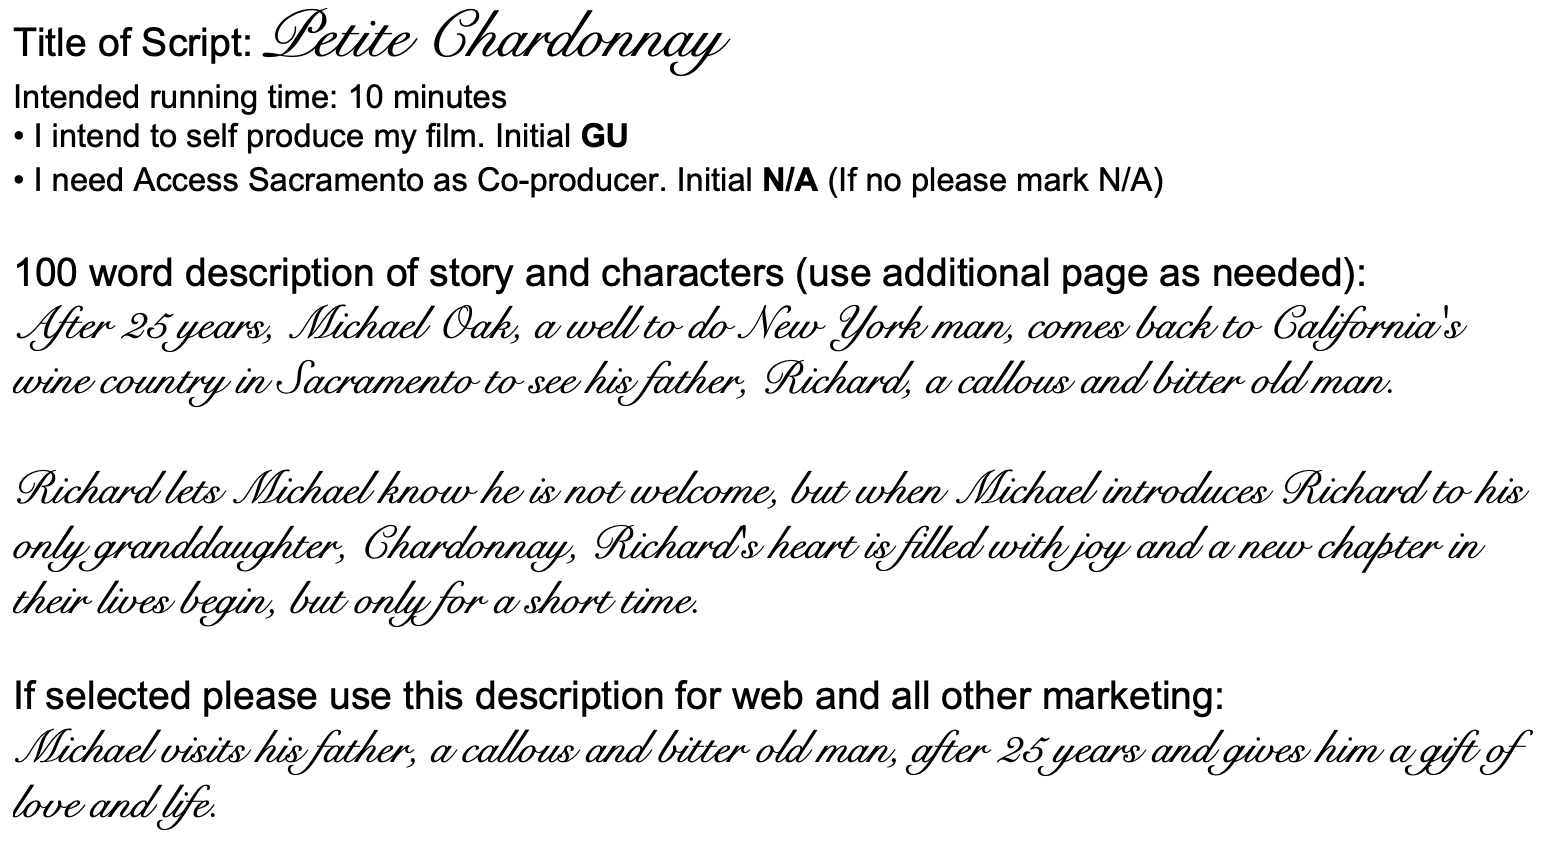 Access Sacramento Submission Form for Petite Chardonnay.